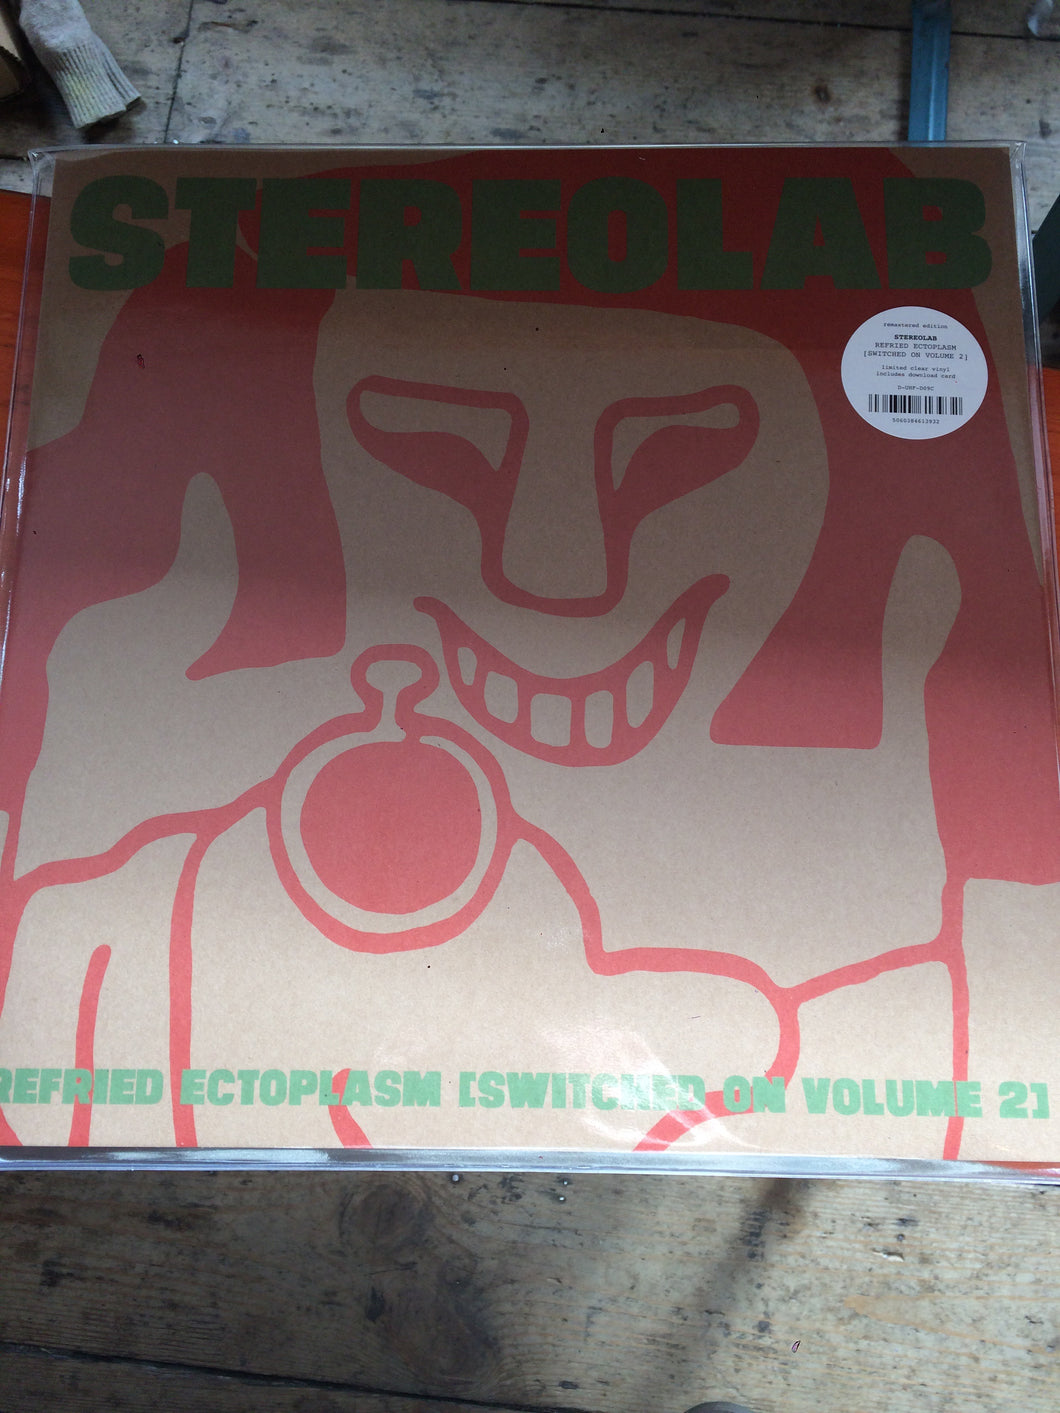 Stereolab	- Refried Ectoplasam